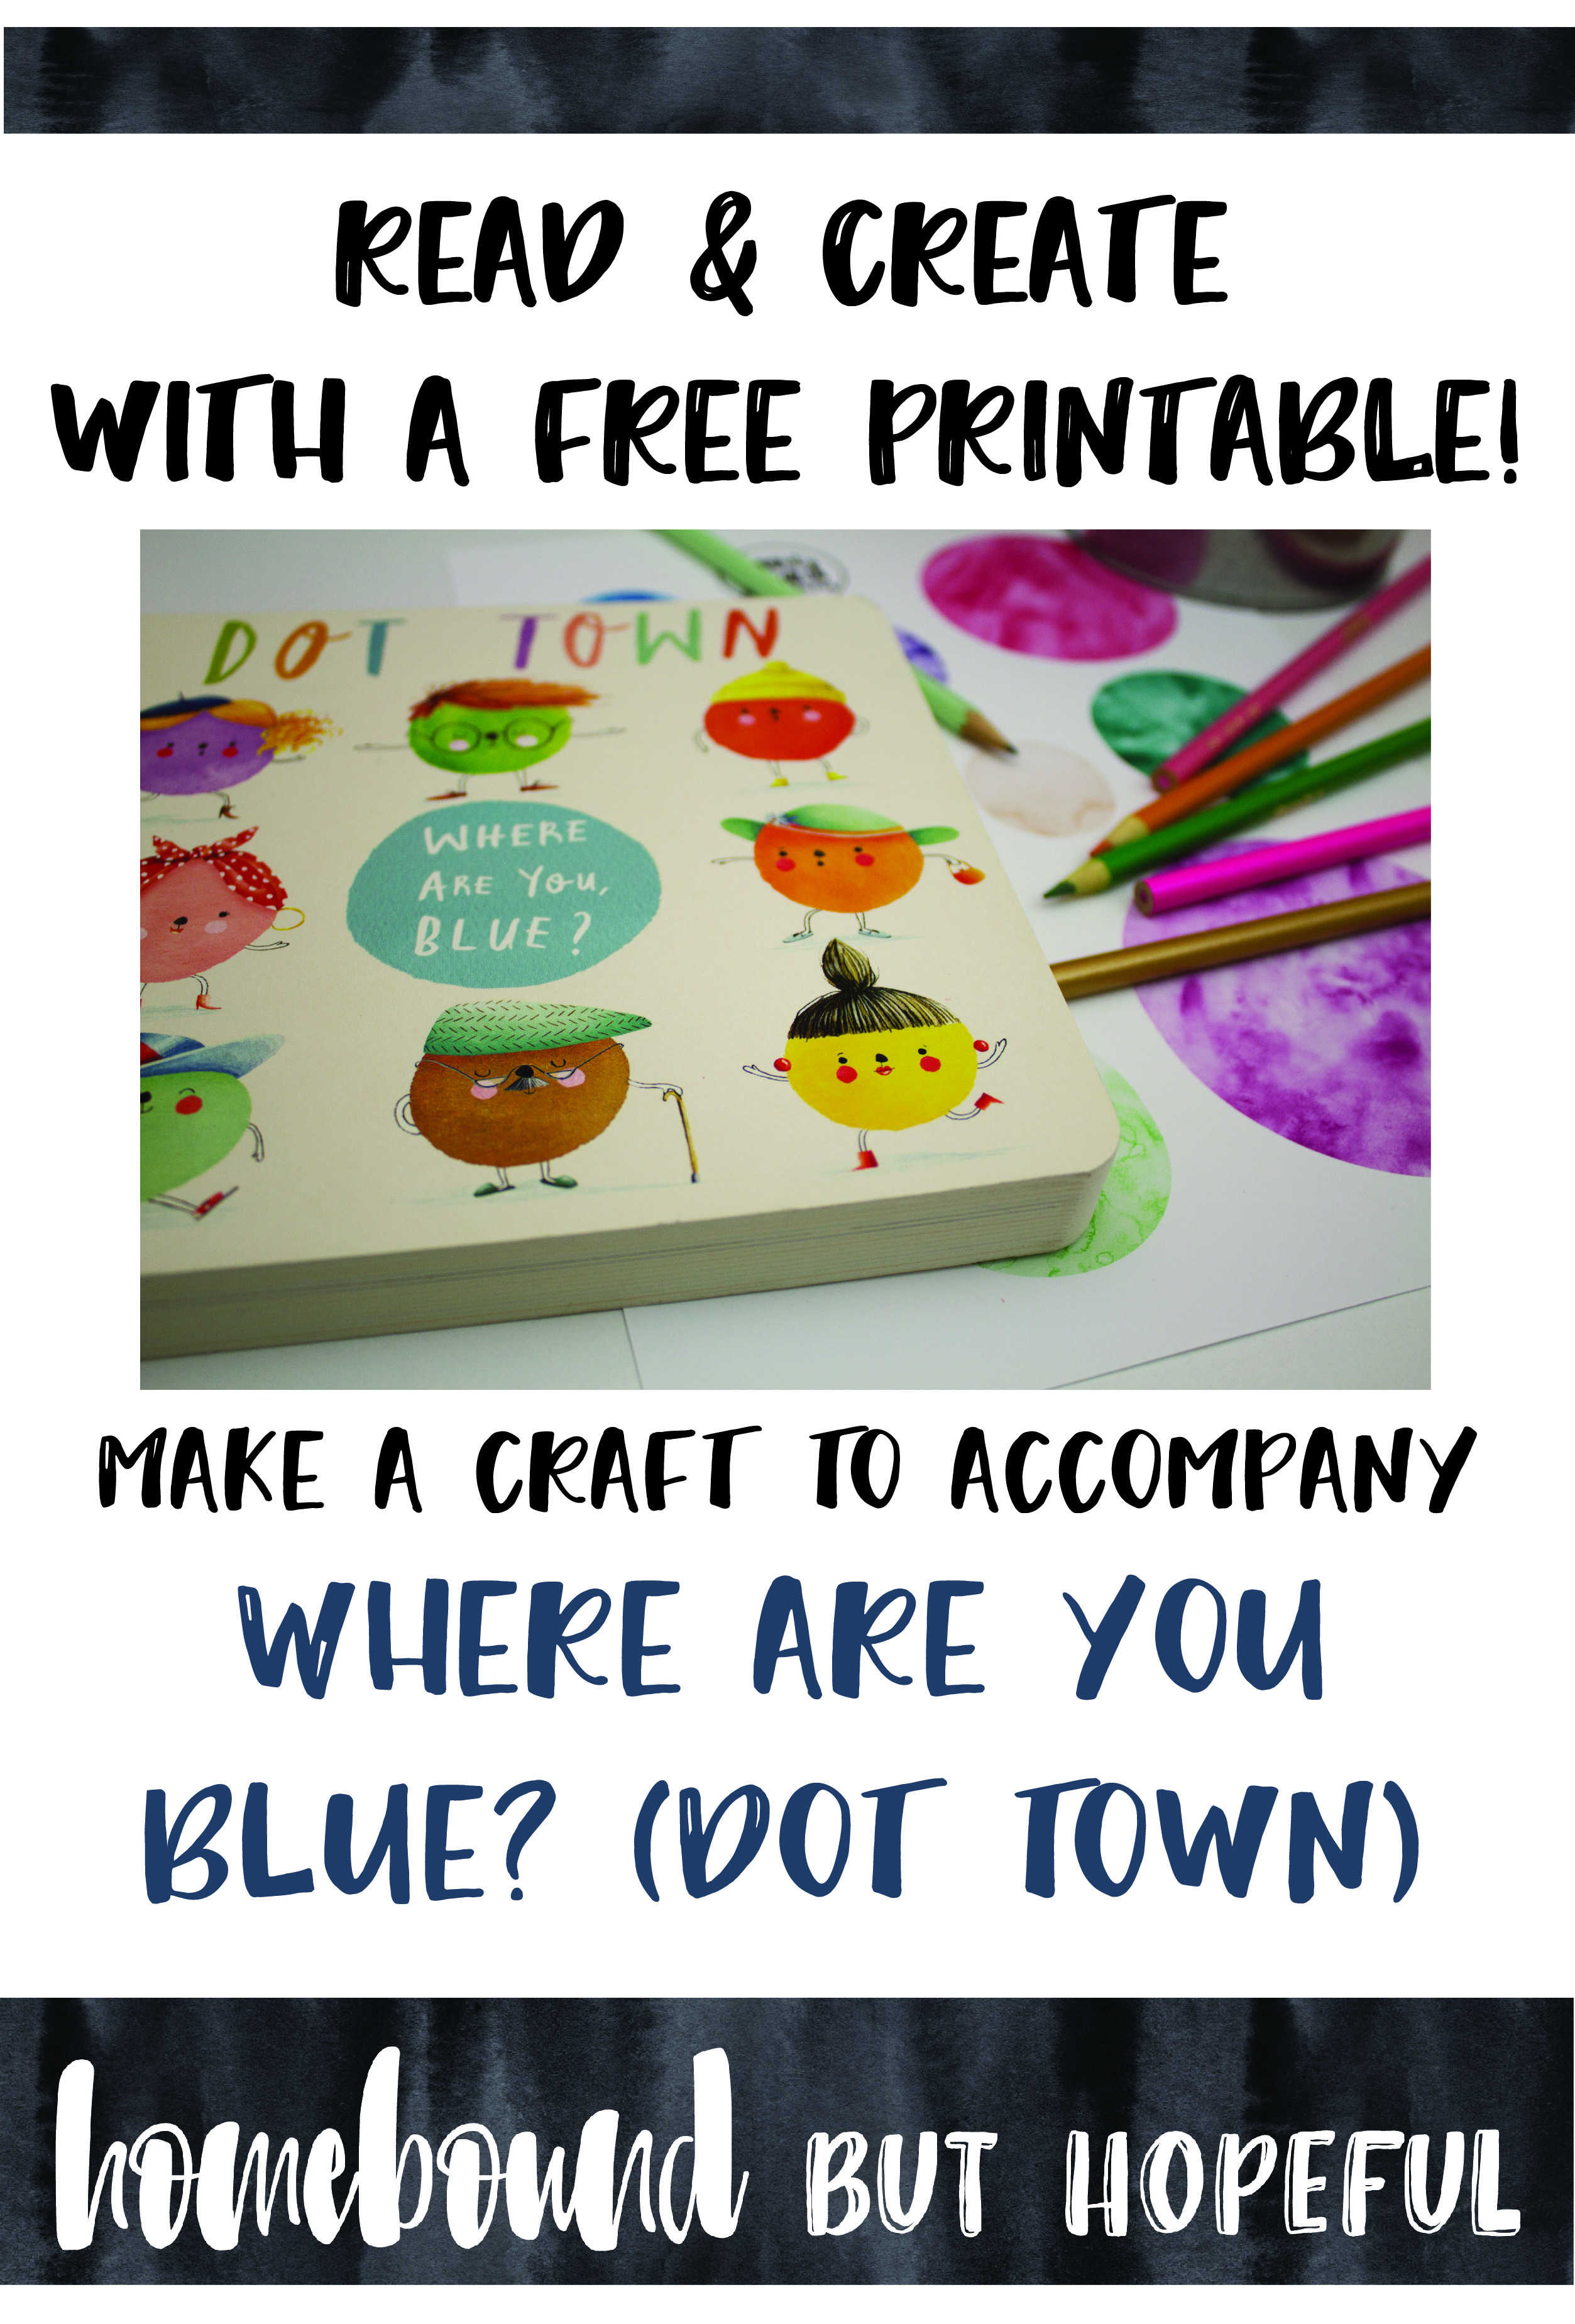 Need a thoughtful, creative outlet for your kids that's low mess & quick to set up? The free printable to accompany kid's lit favorite "Where Are You Blue?" completely fits the bill!